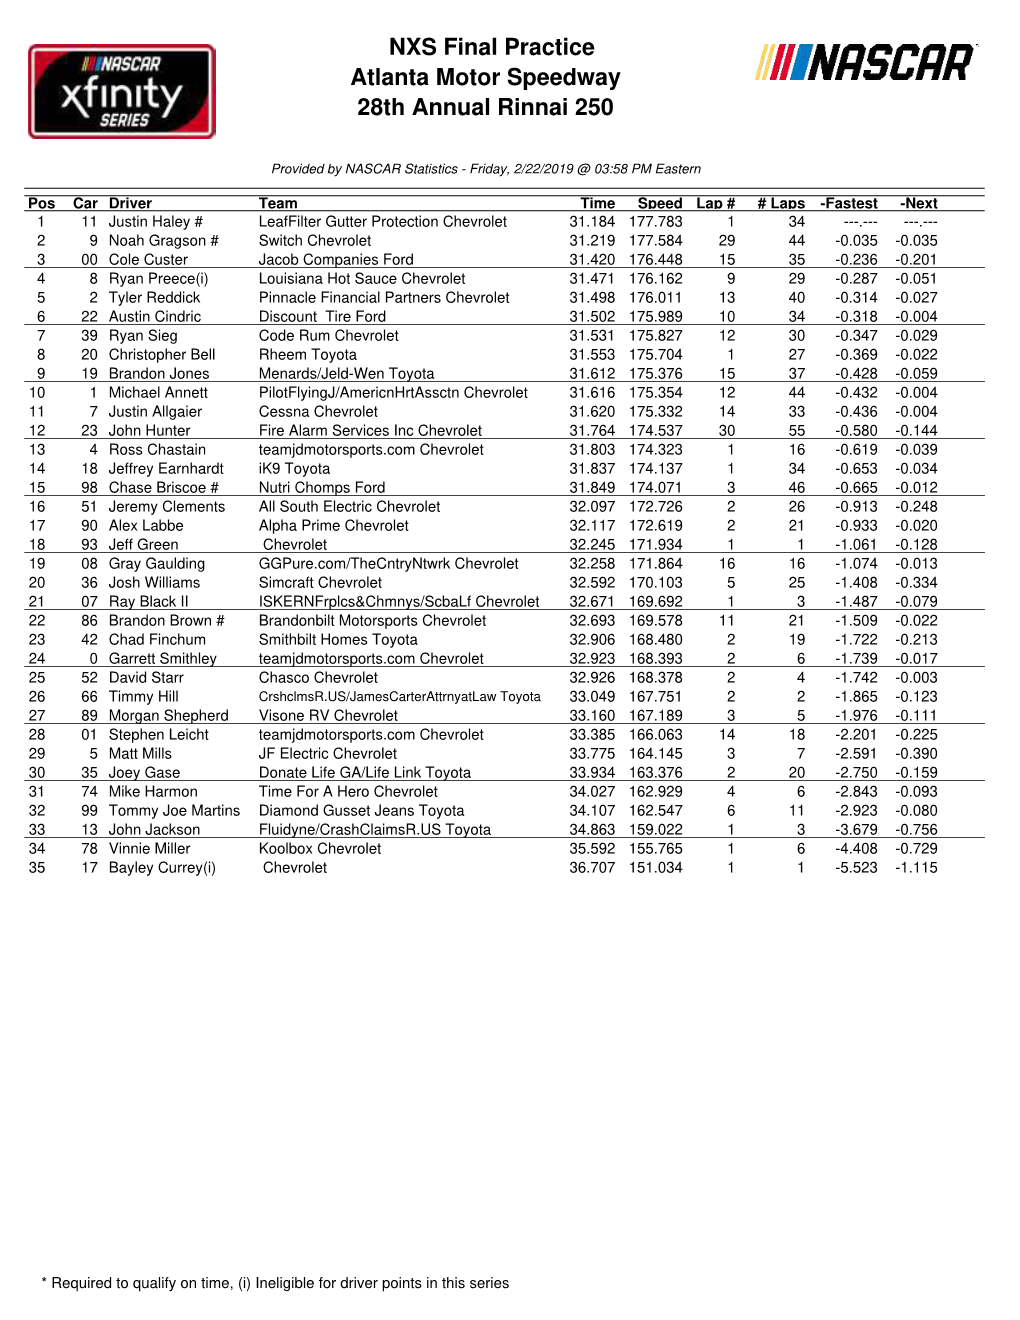 Final Practice Results